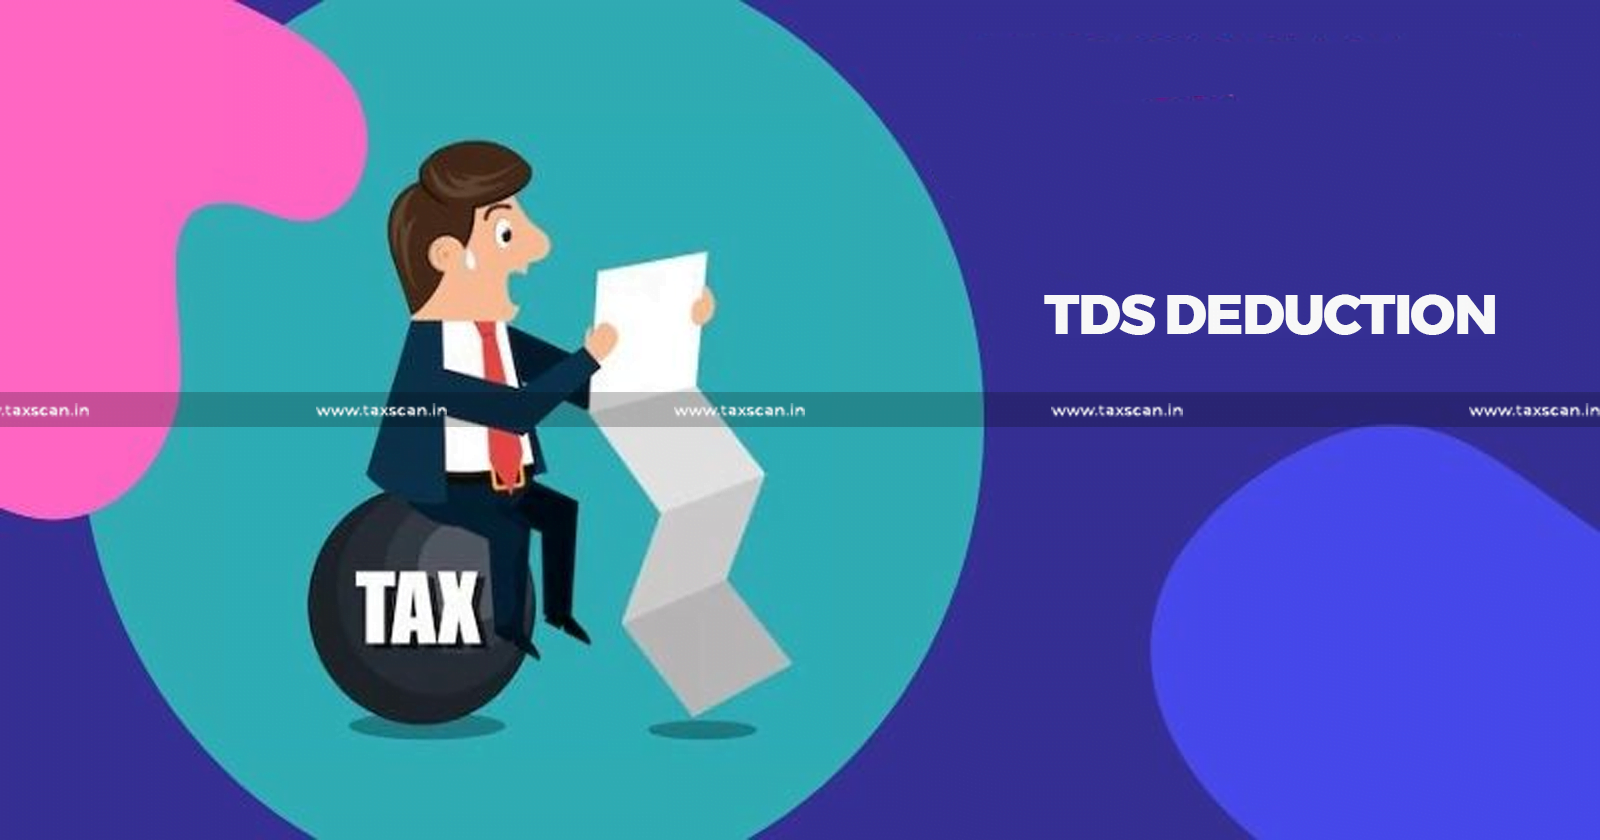 Assessee - TDS Deduction - Corresponding Income - Tax - non claiming - Double Deduction - ITAT - taxscan